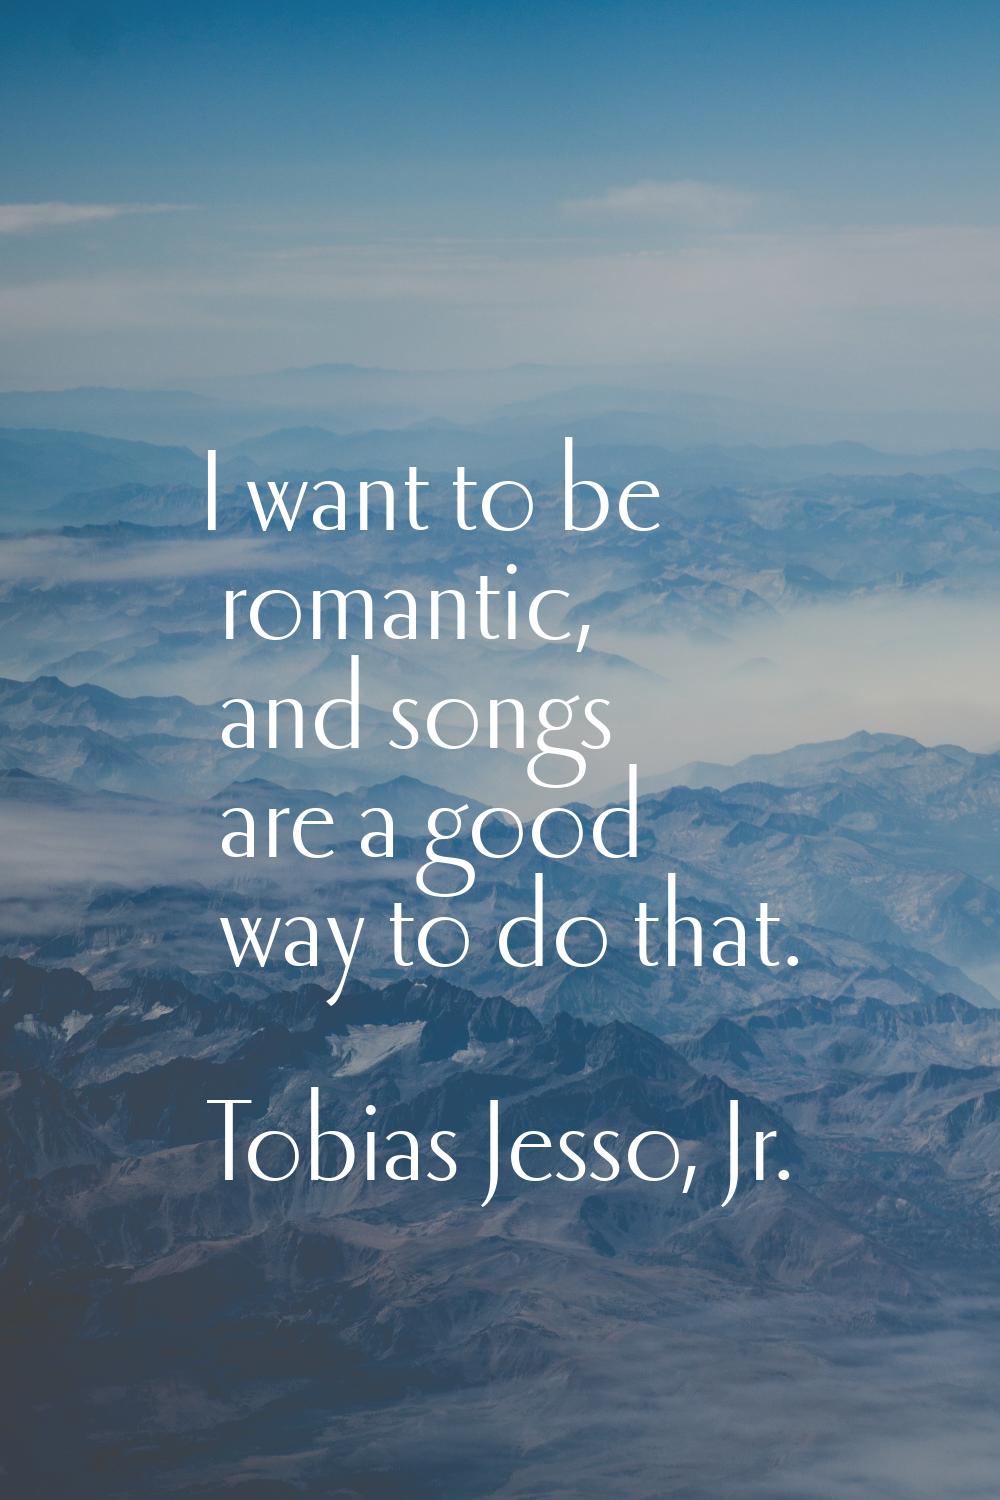 I want to be romantic, and songs are a good way to do that.